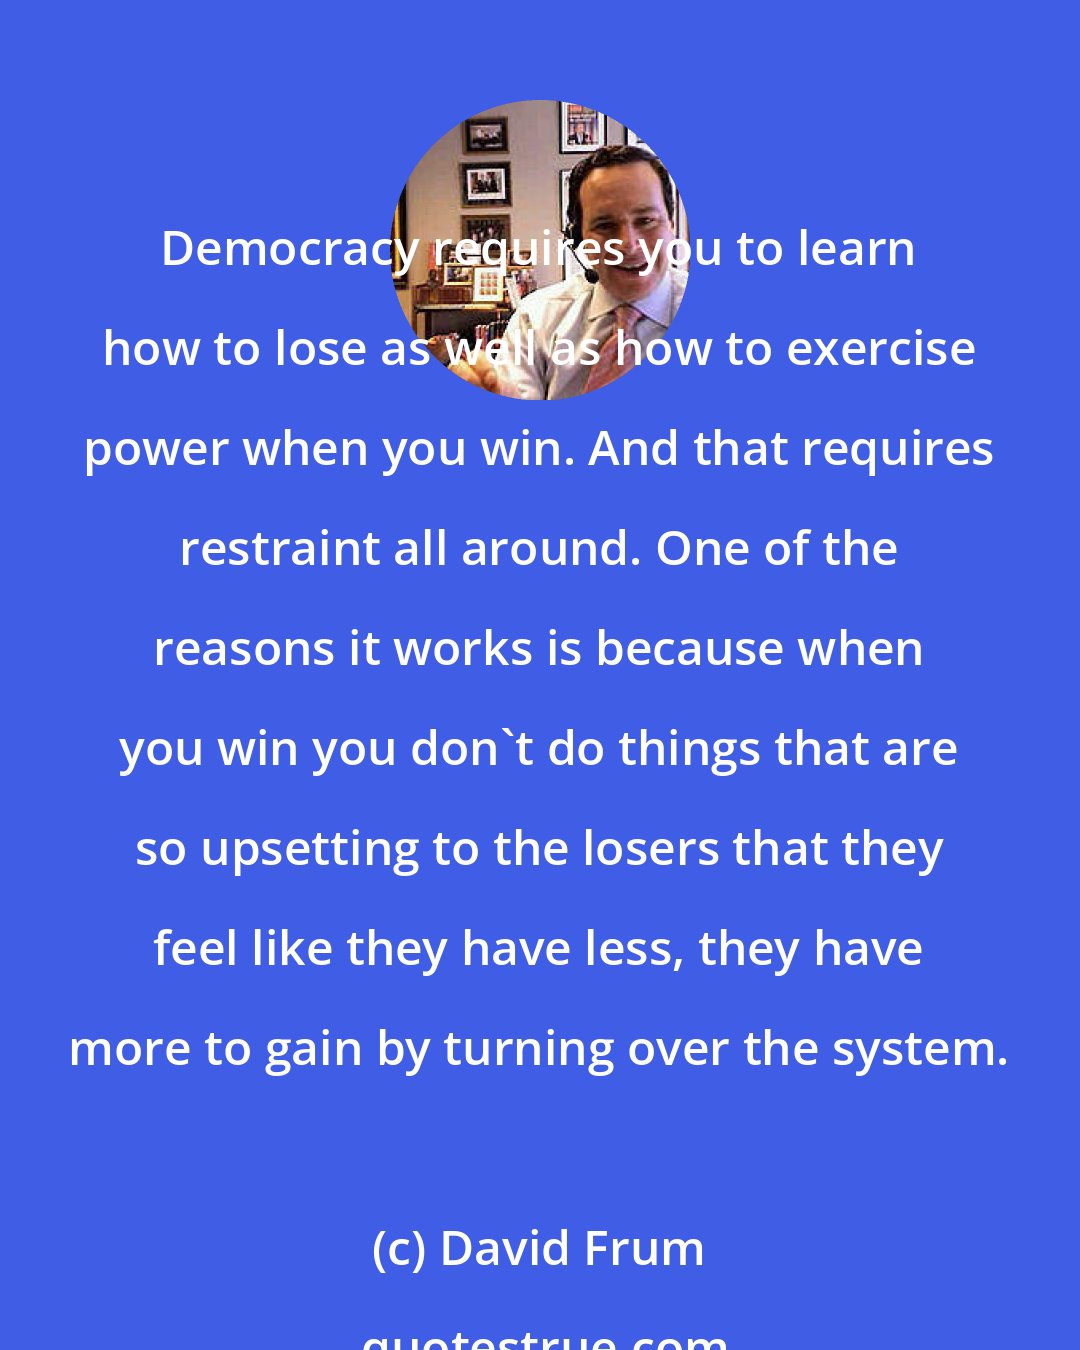 David Frum: Democracy requires you to learn how to lose as well as how to exercise power when you win. And that requires restraint all around. One of the reasons it works is because when you win you don't do things that are so upsetting to the losers that they feel like they have less, they have more to gain by turning over the system.